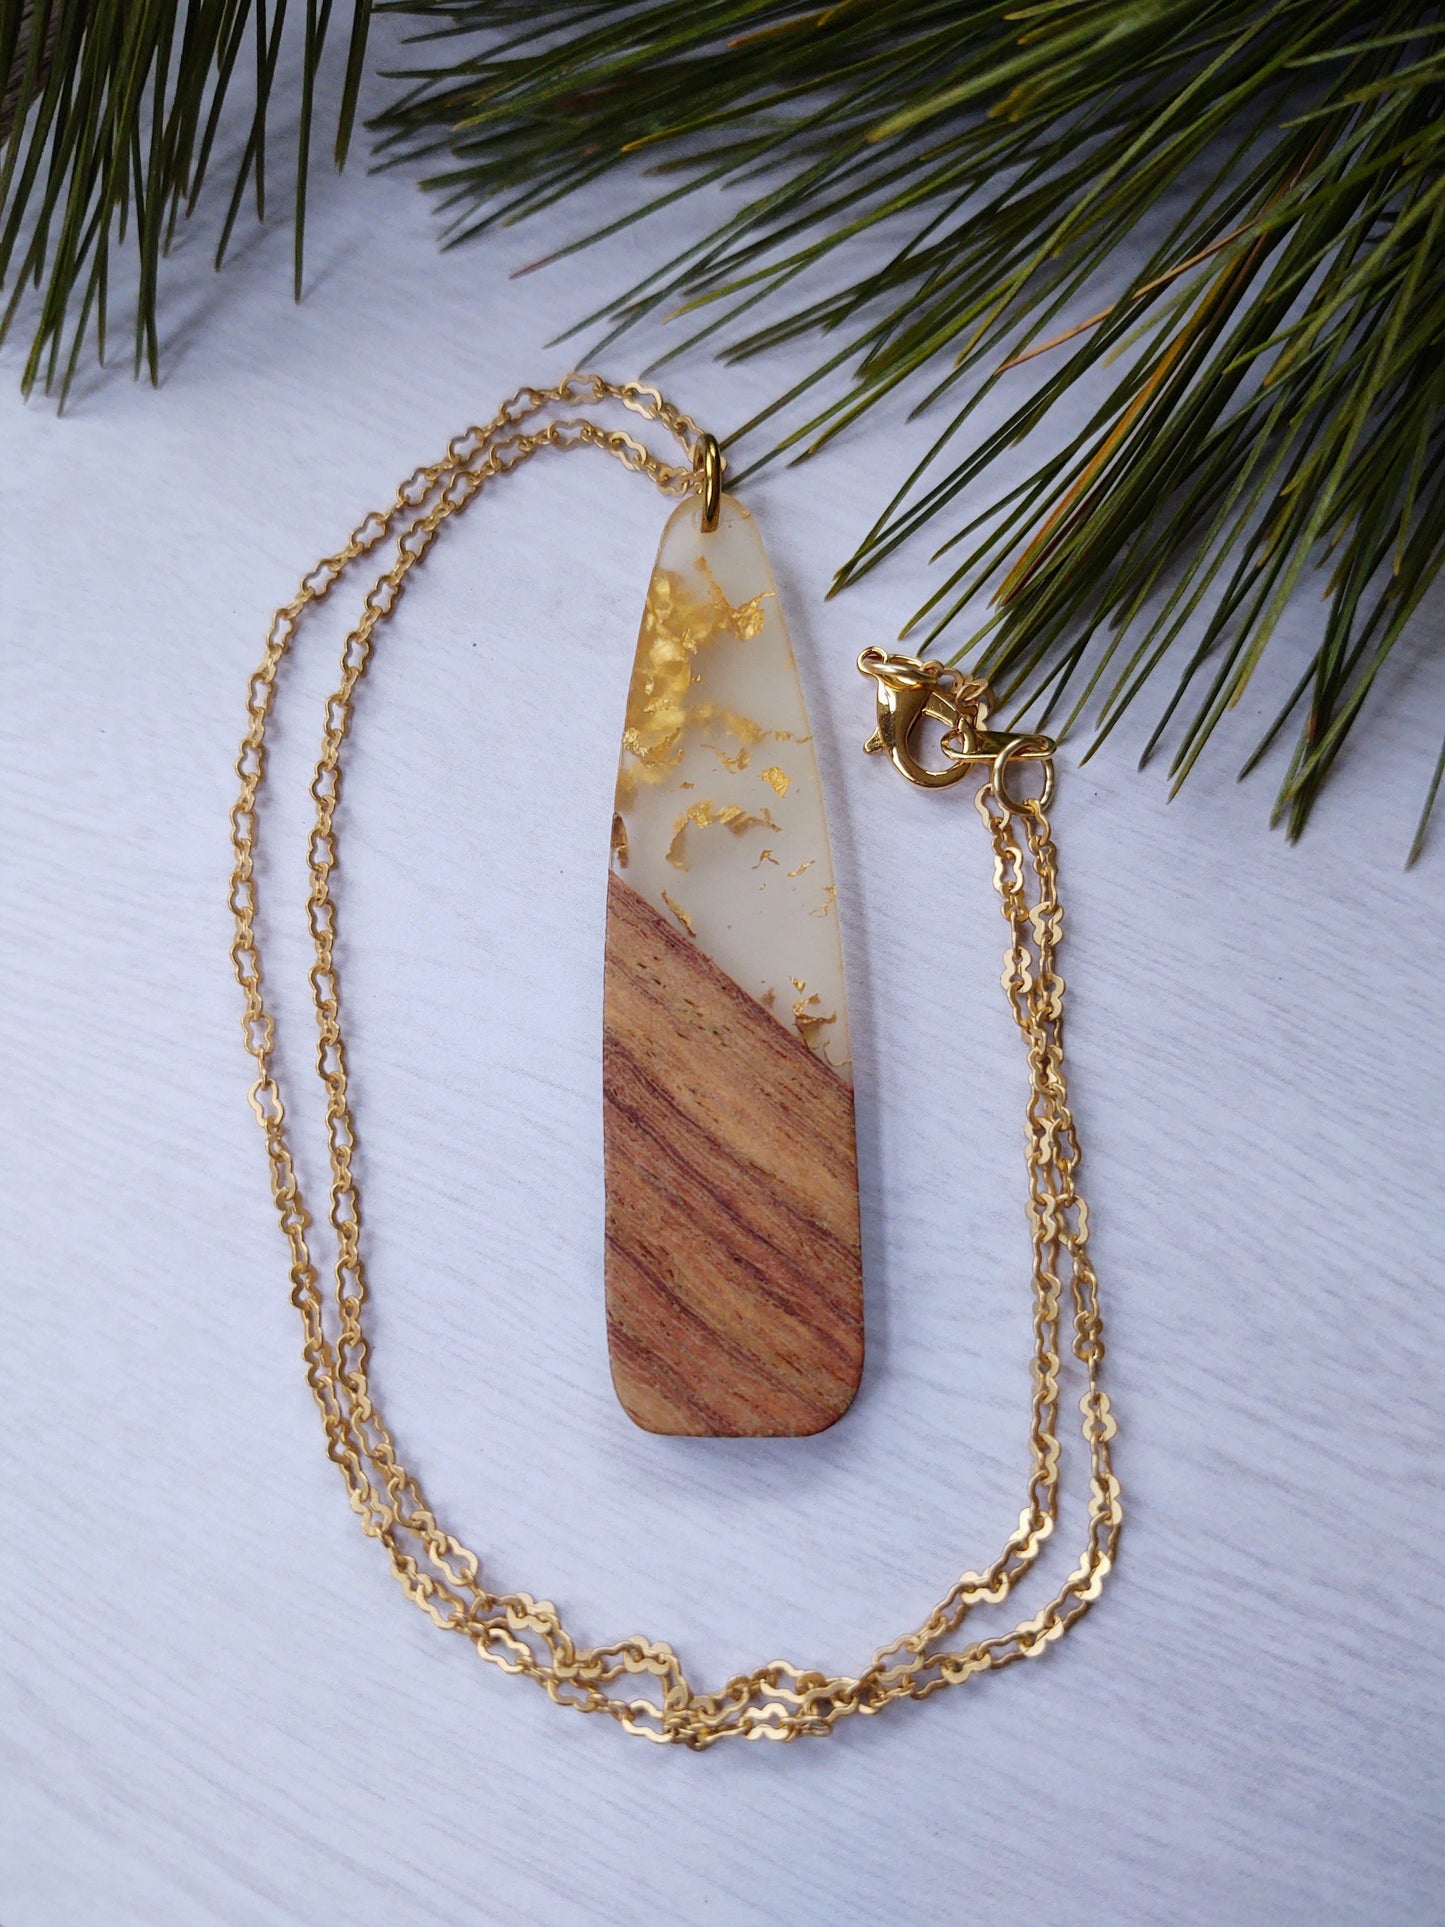 Gold and Wood necklace